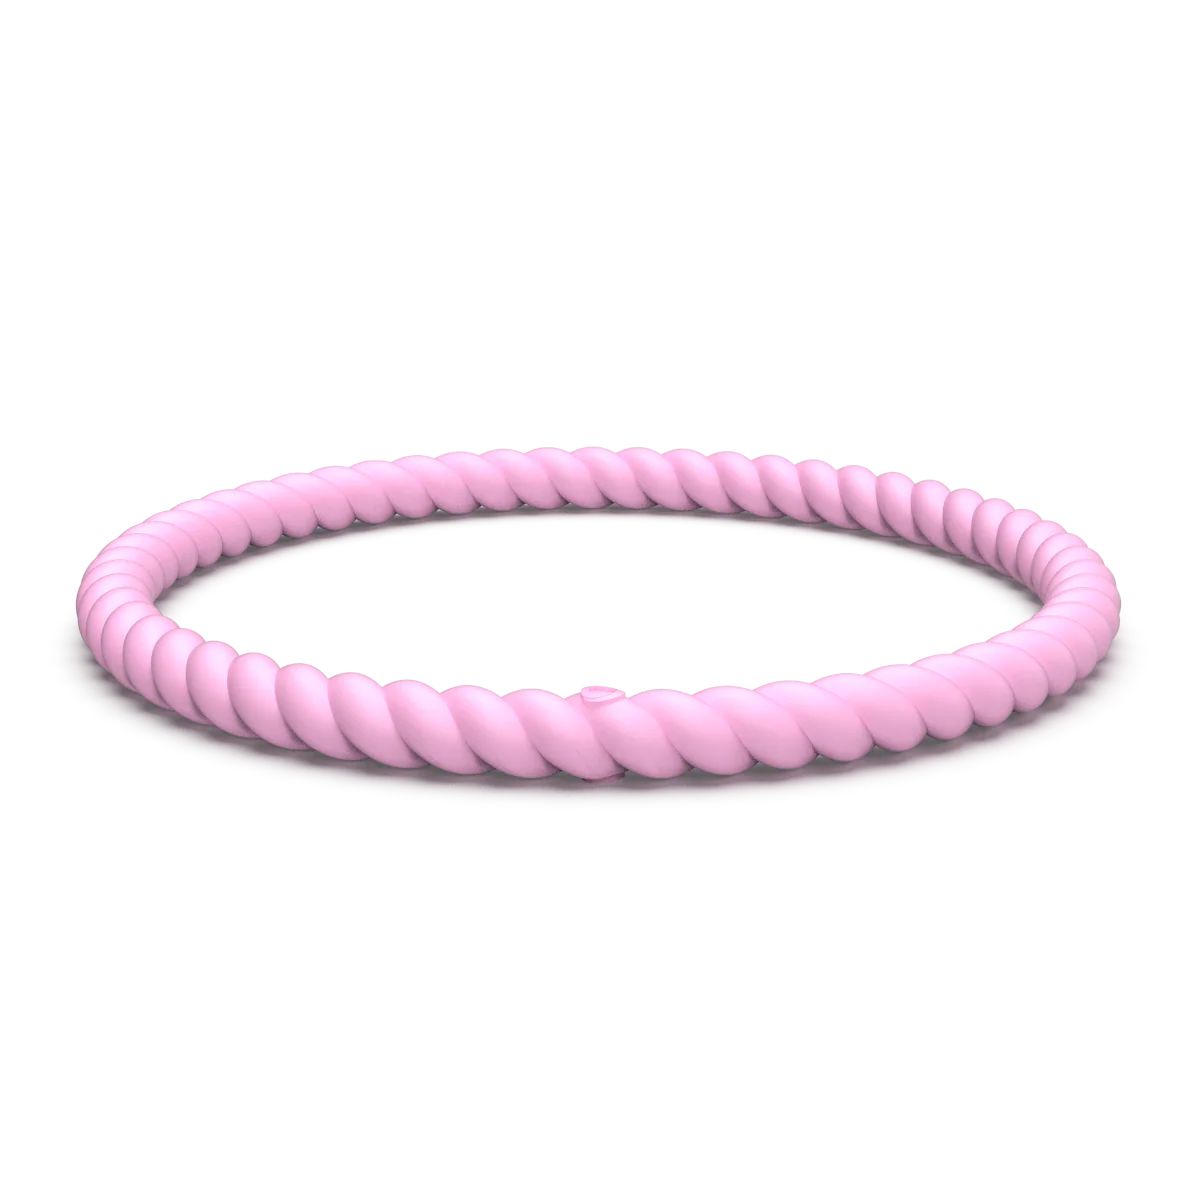 Braided Stackable Silicone Bracelet - Cherry Blossom | Enso Rings